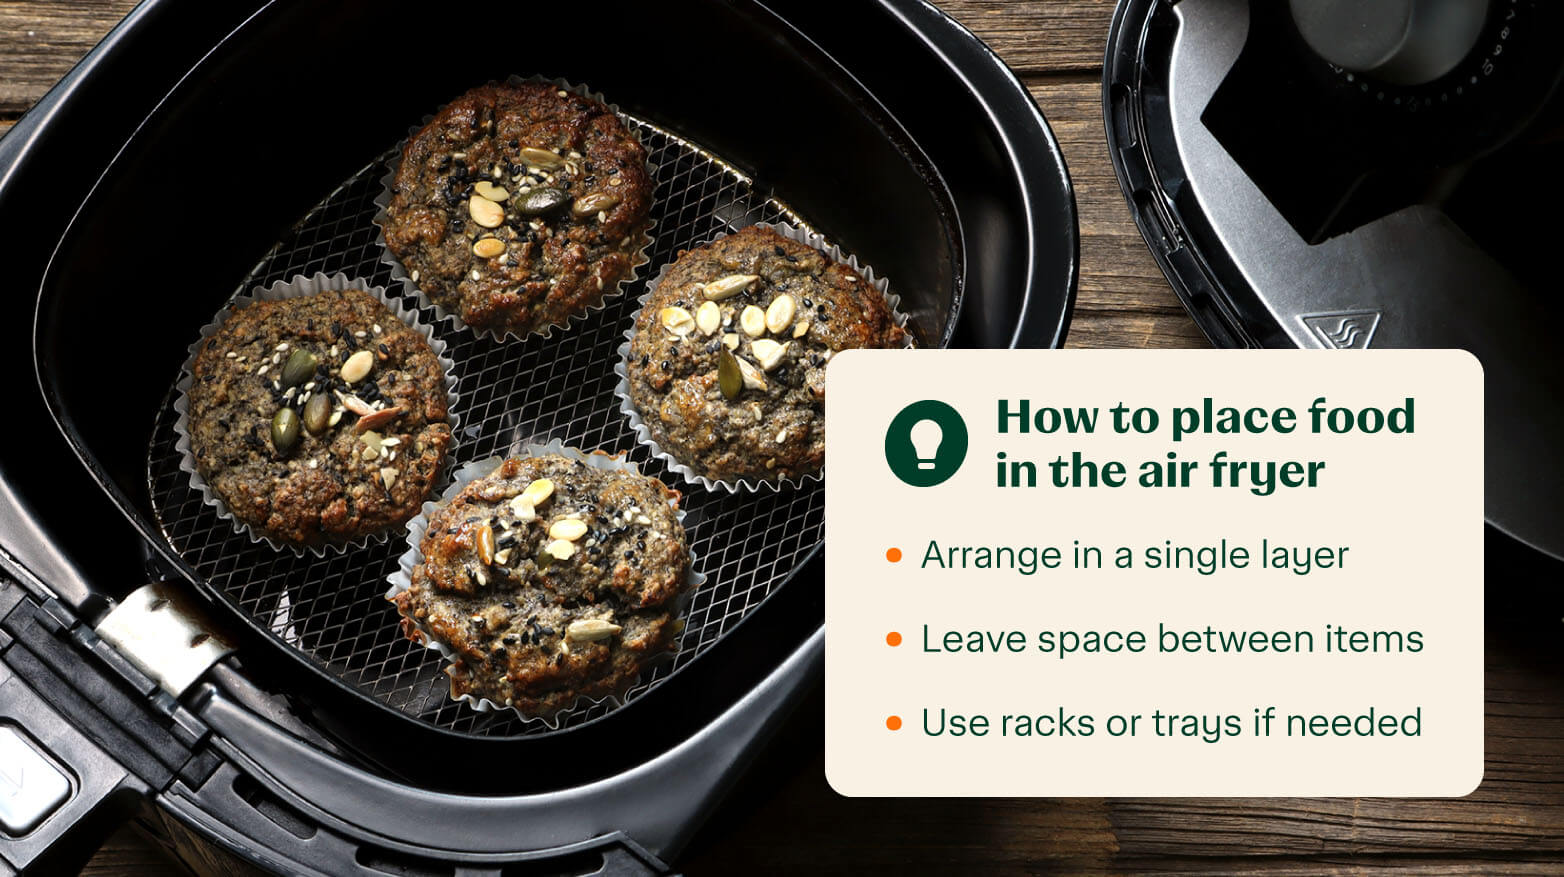 Four muffins in air fryer basket with directions on how to place food in an air fryer. 